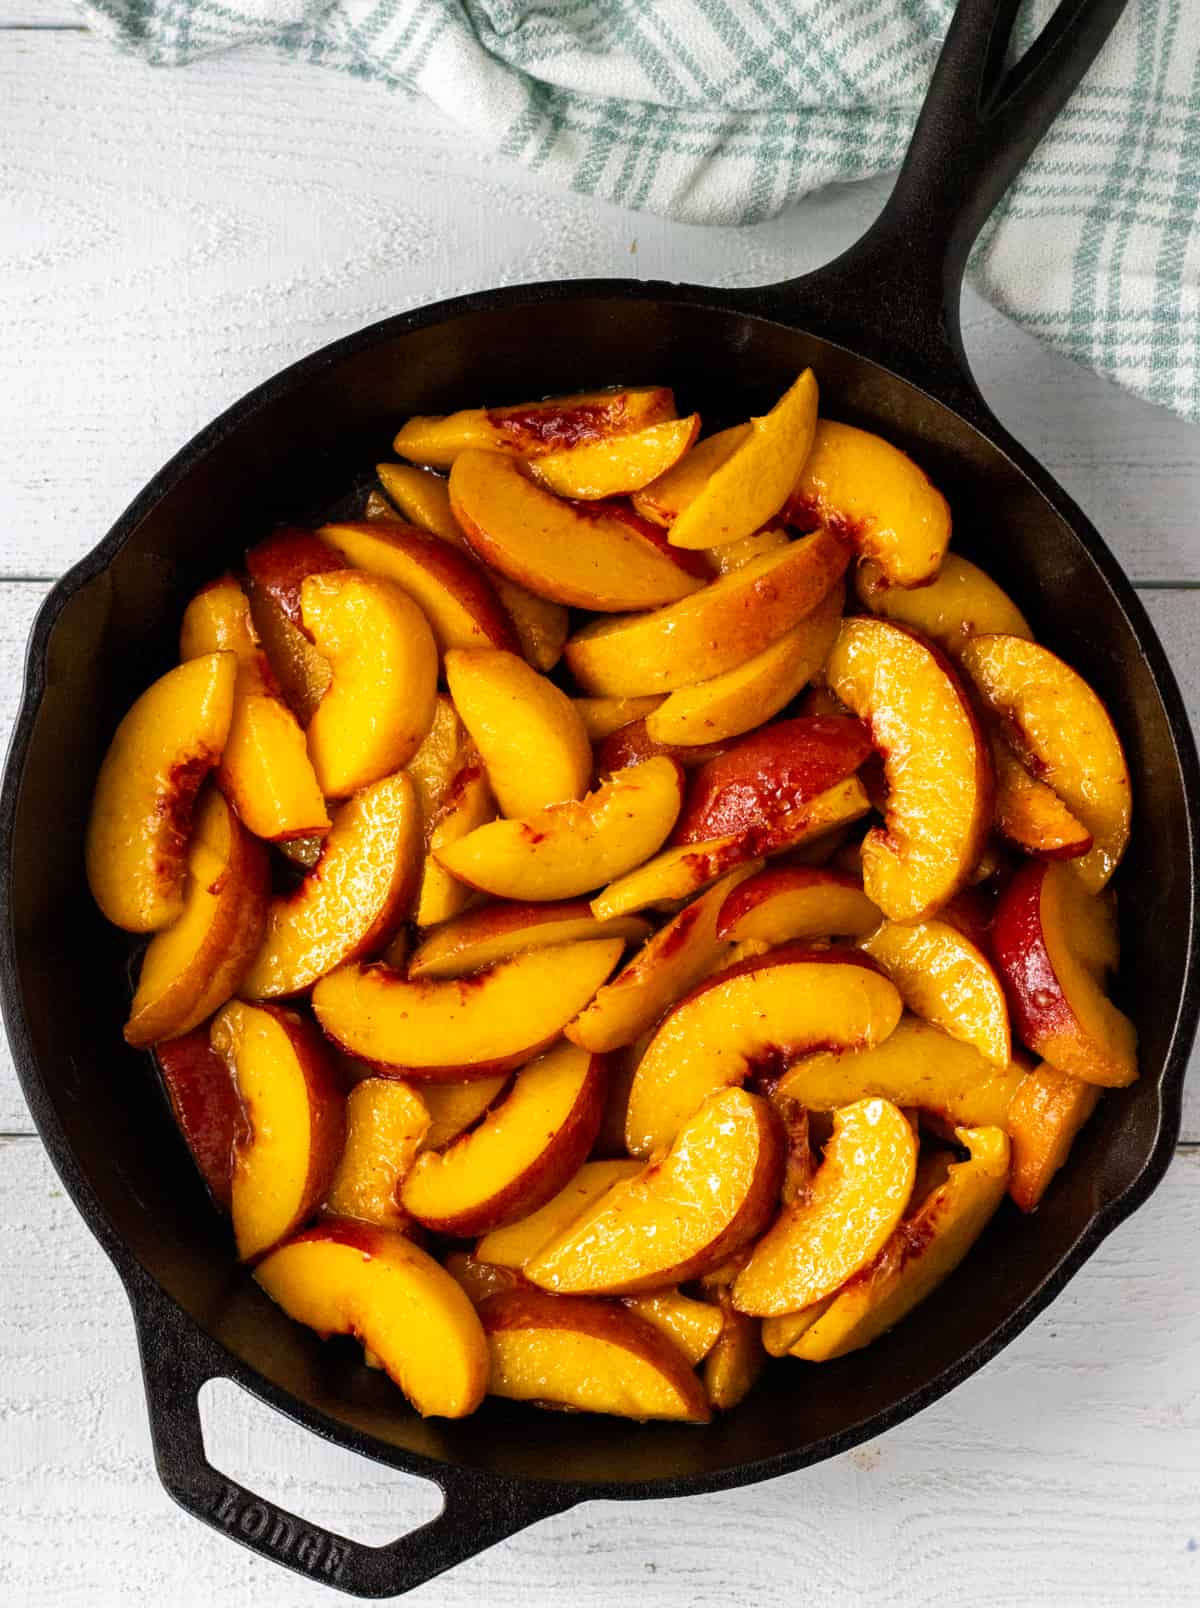 Sliced peaches in a cast iron pan.